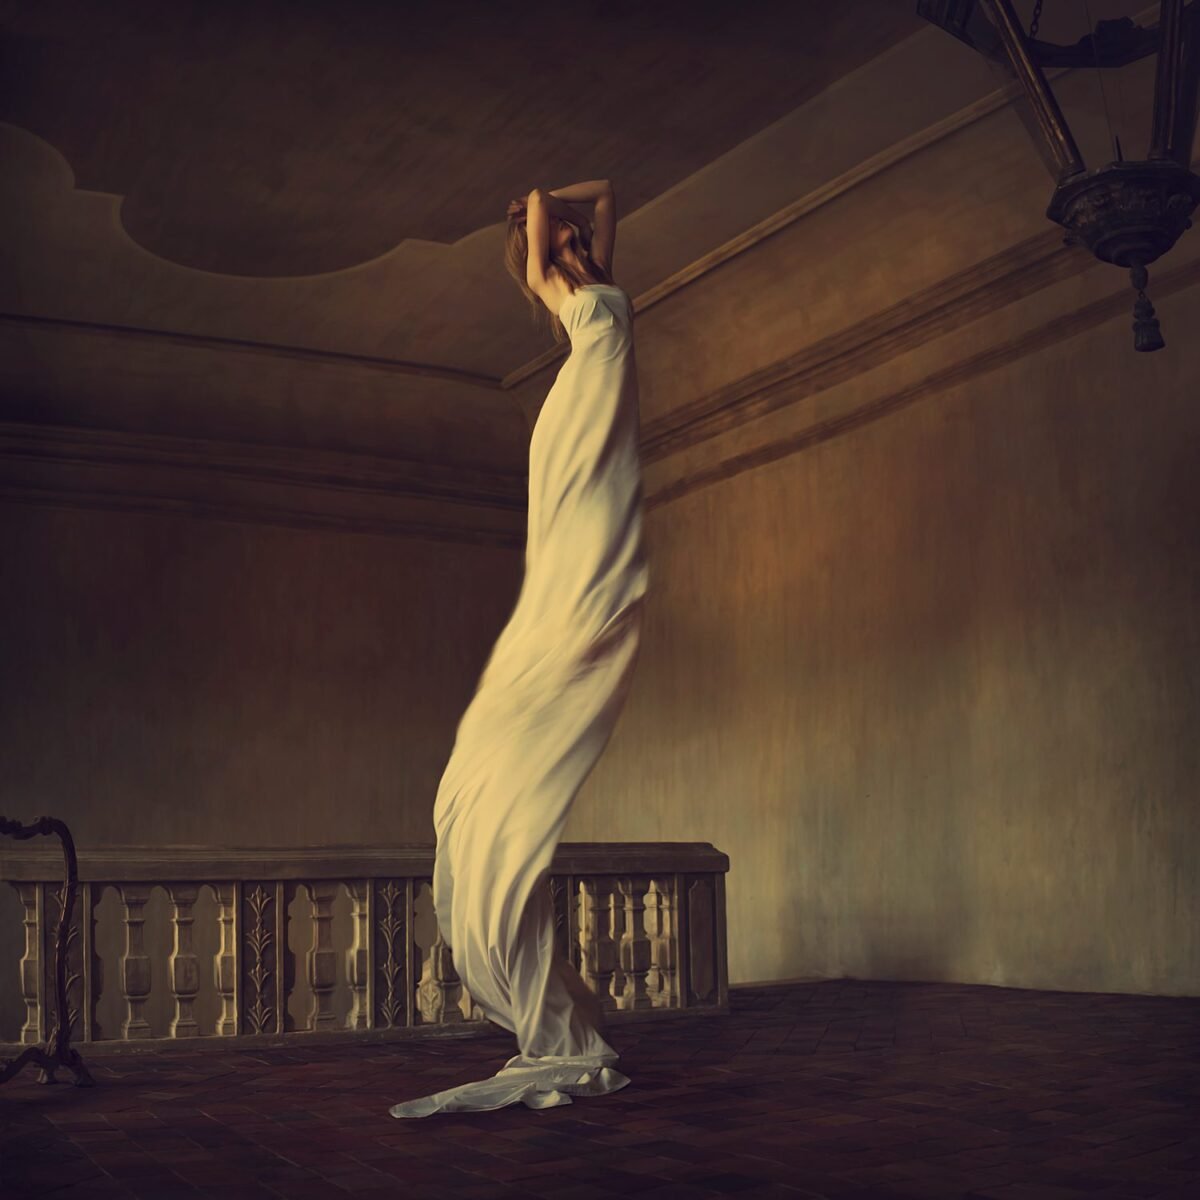 House of Solitude by Brooke Shaden